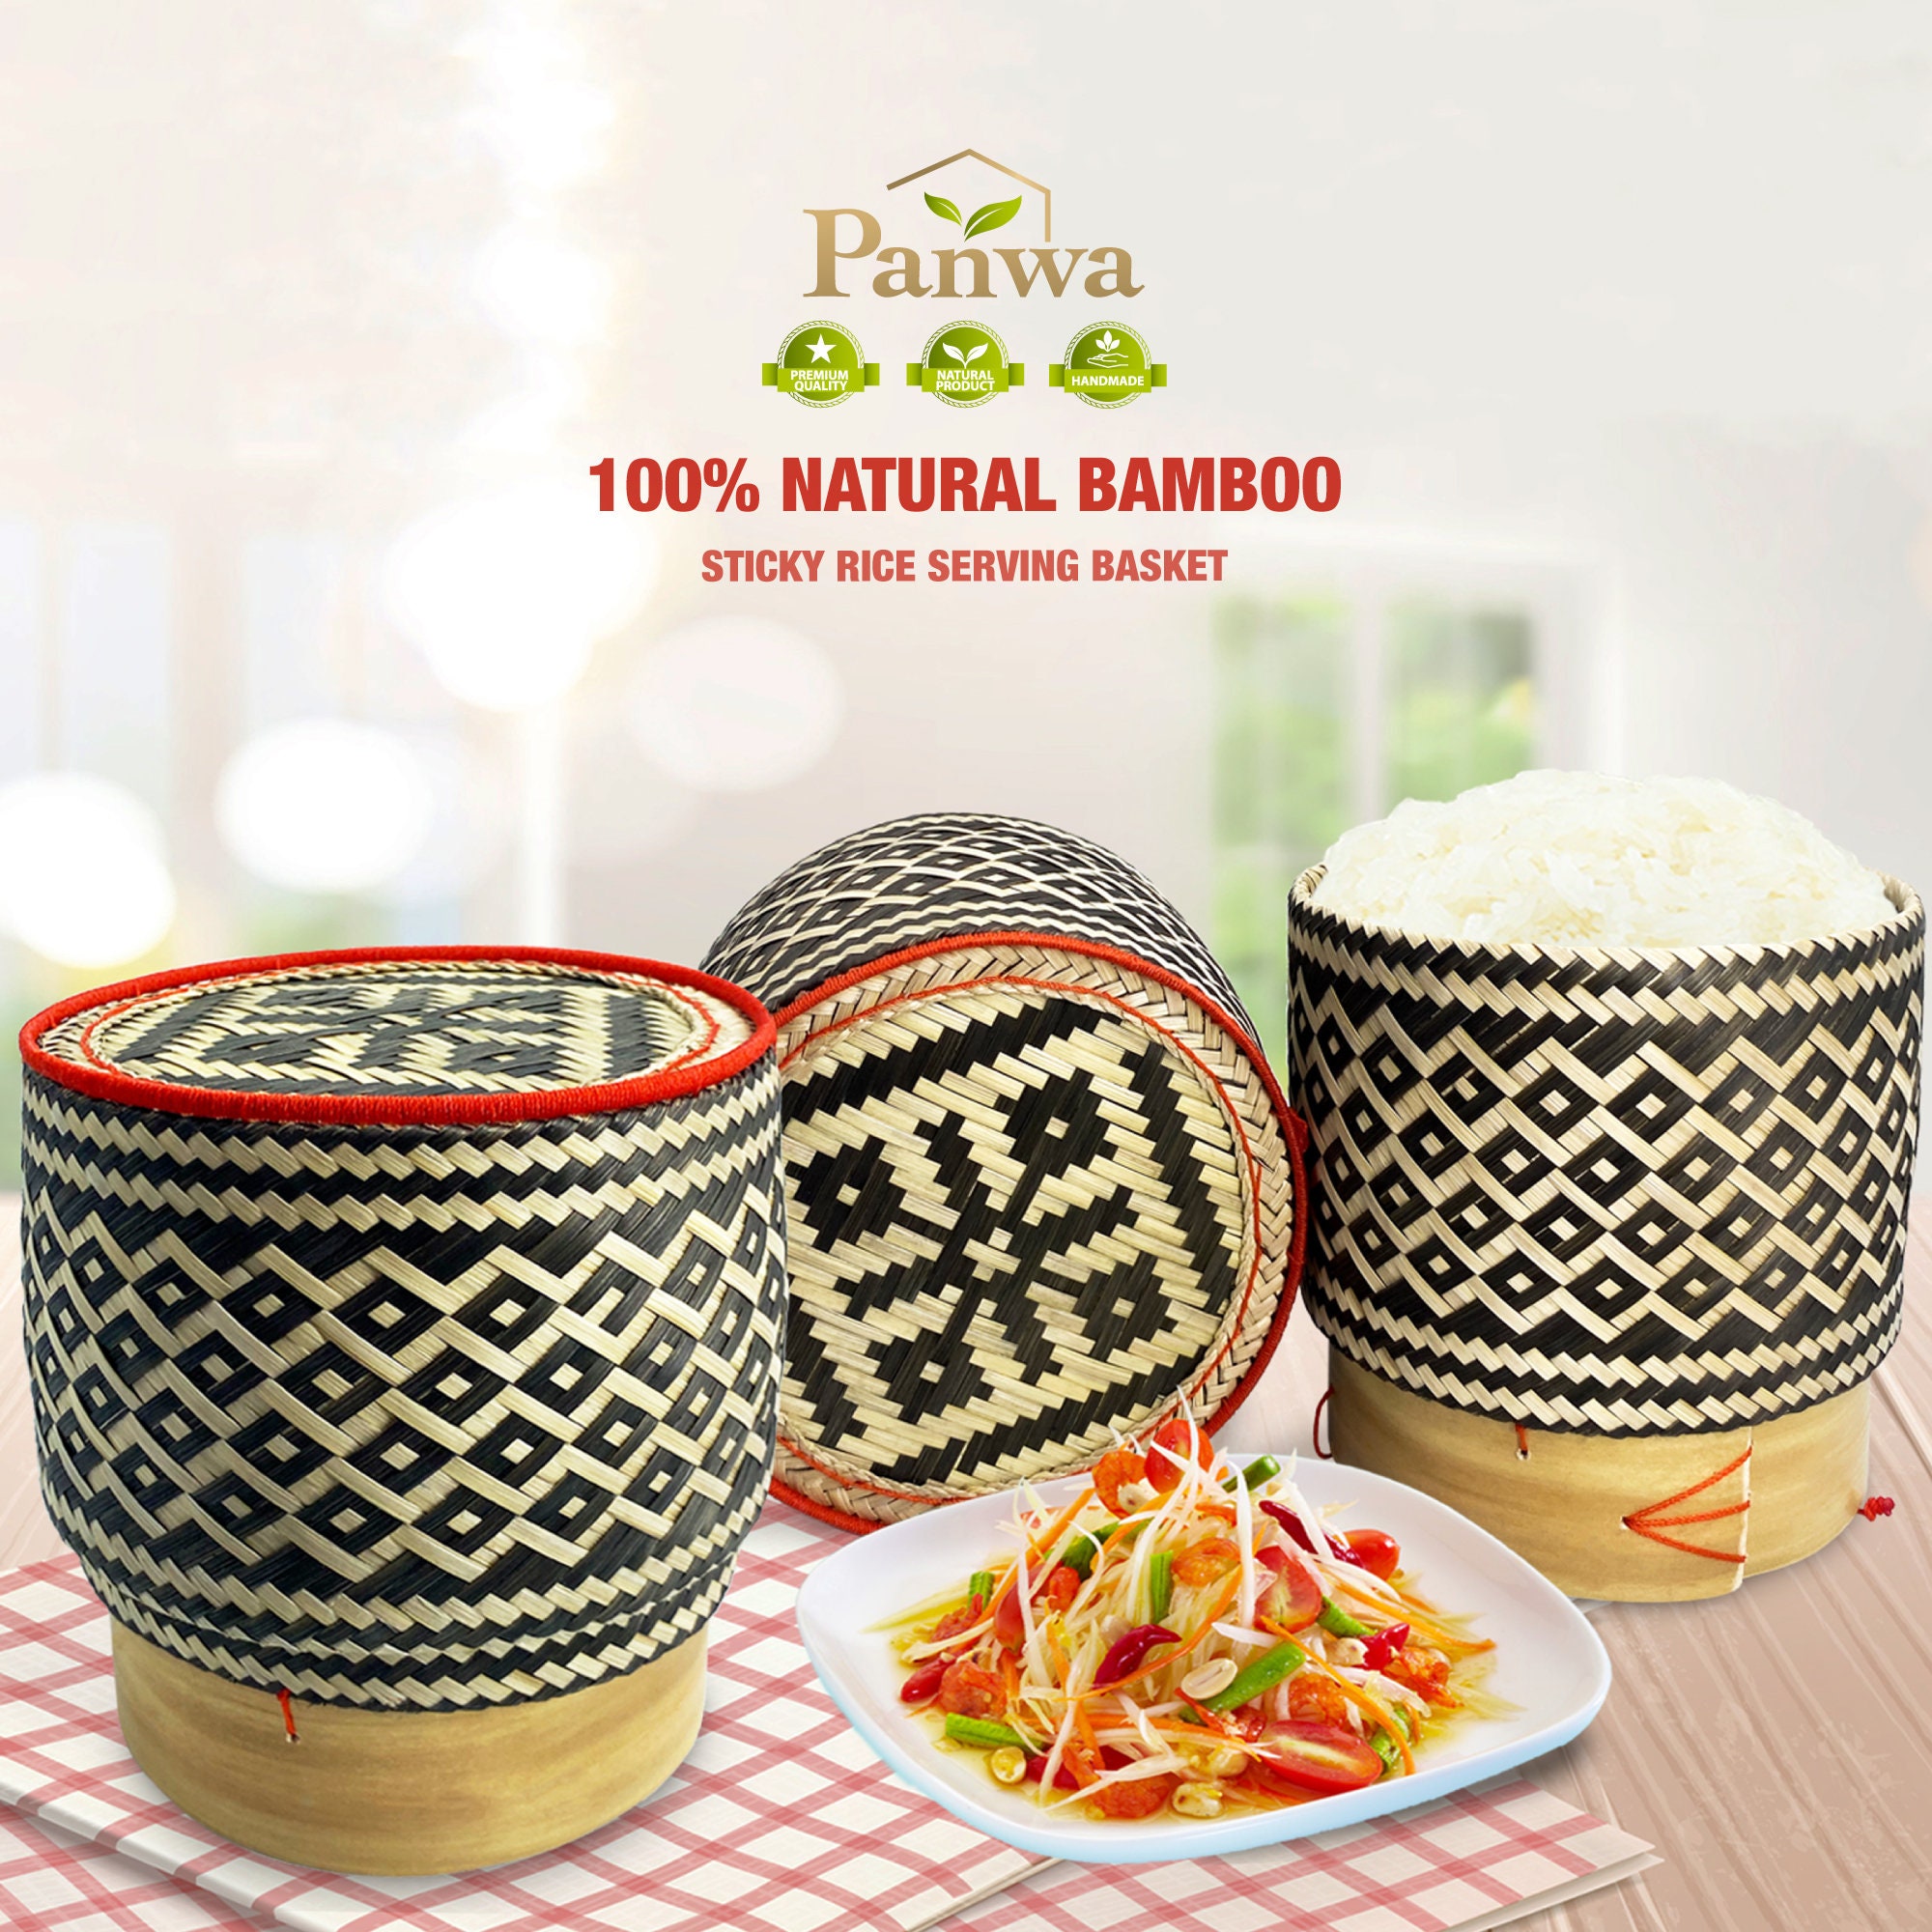 PANWA Sticky Rice Cooking Basket 2 Pc Set Natural Scented